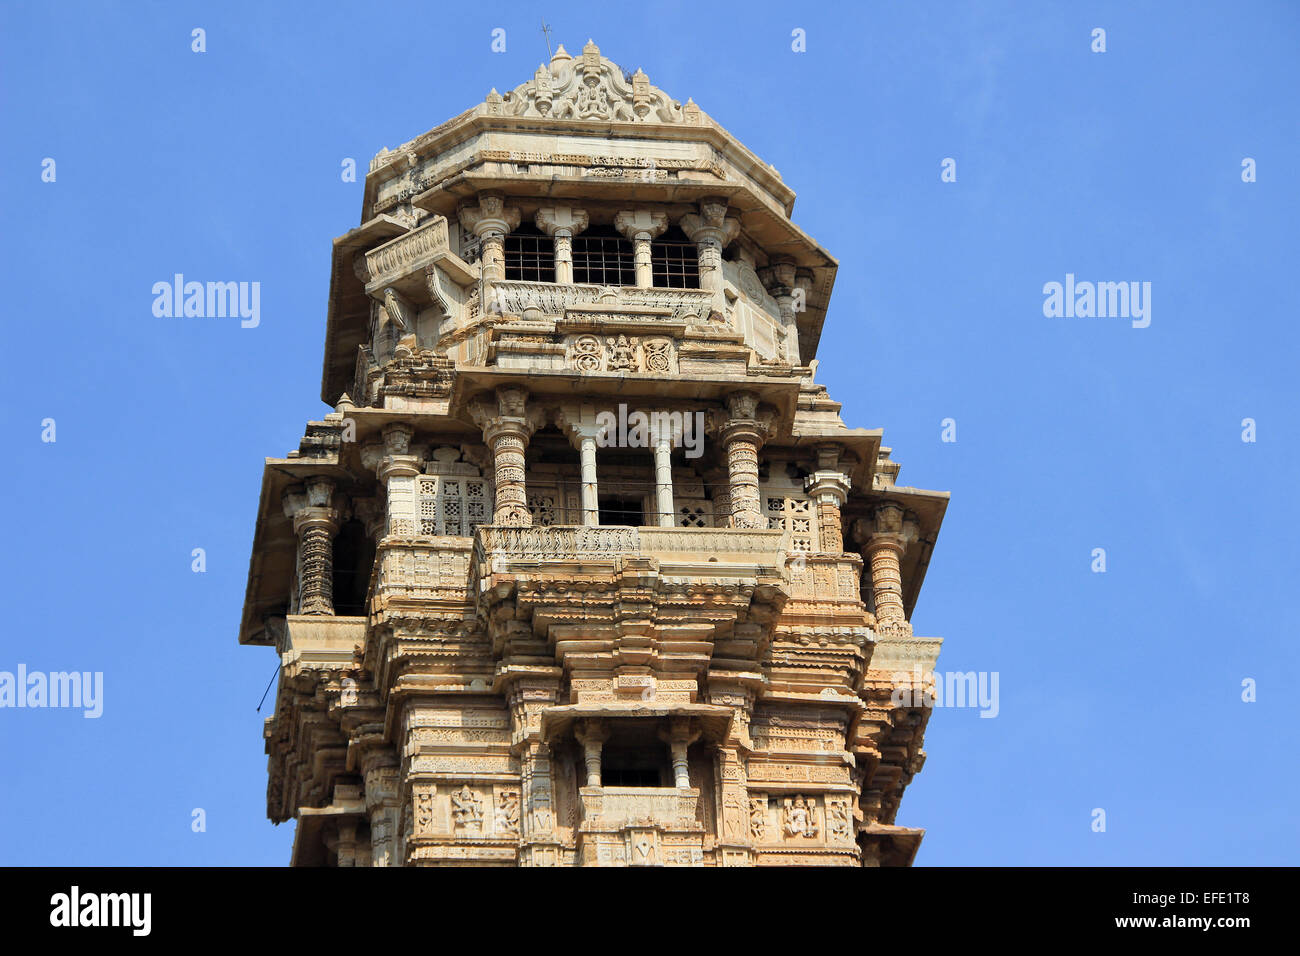 Closer view of top floors of Vijay Sthambh (Victory Tower), Chittorgarh Fort, Rajasthan, India, Asia Stock Photo